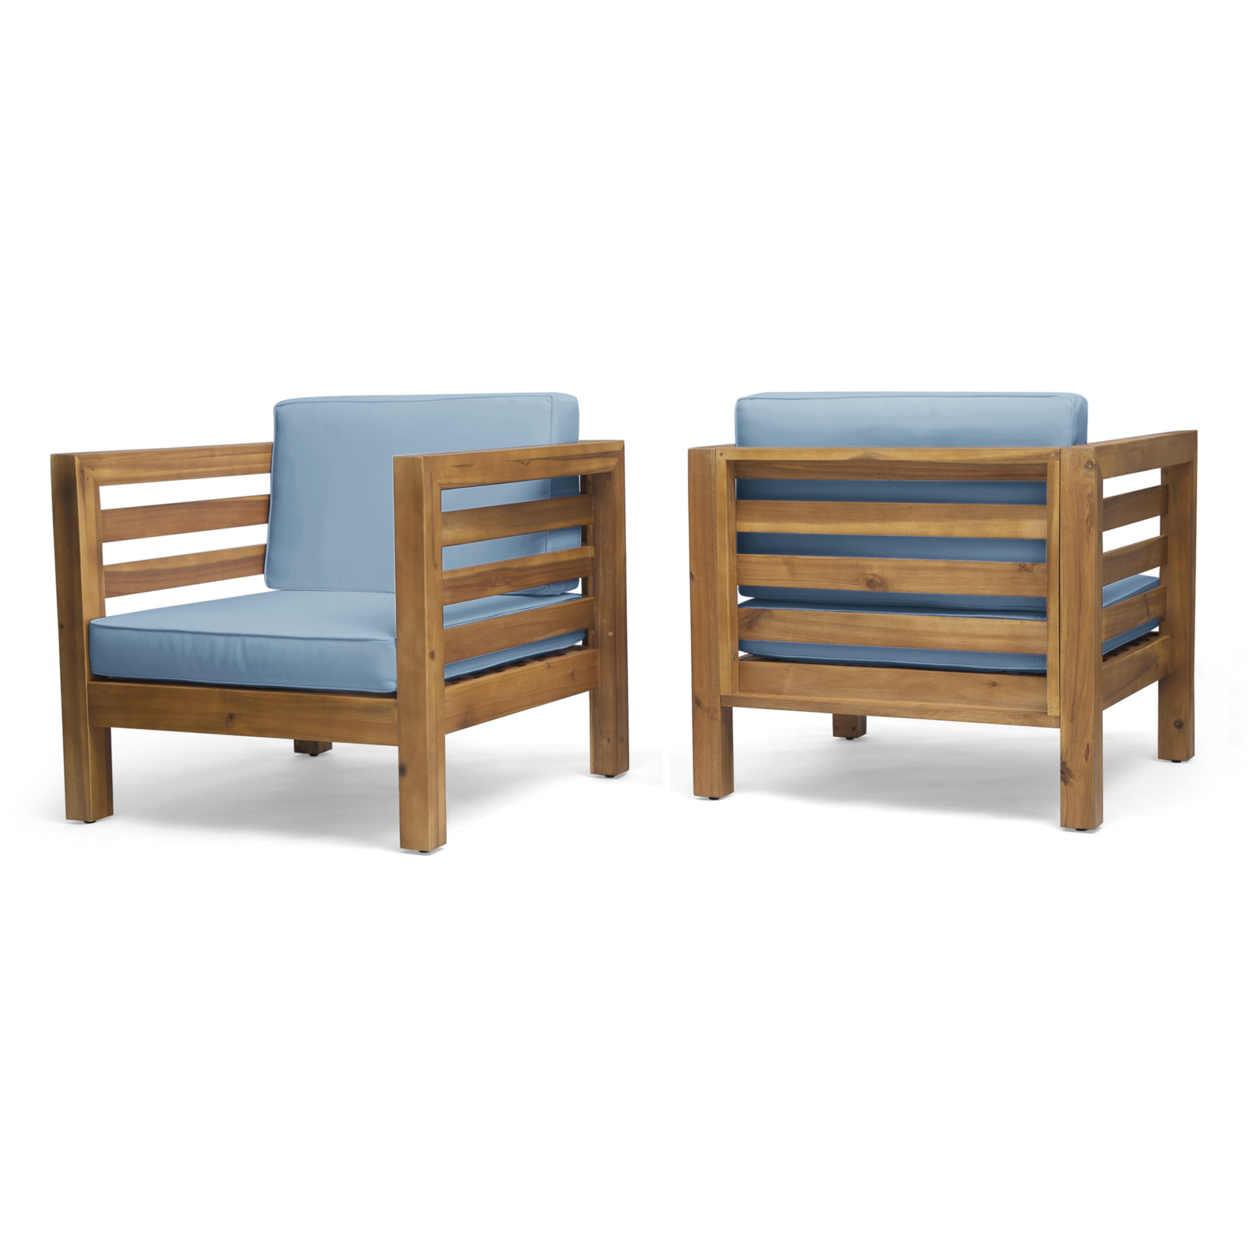 Louise Outdoor Acacia Wood Club Chairs With Cushions (Set Of 2) - Gray Finish + White